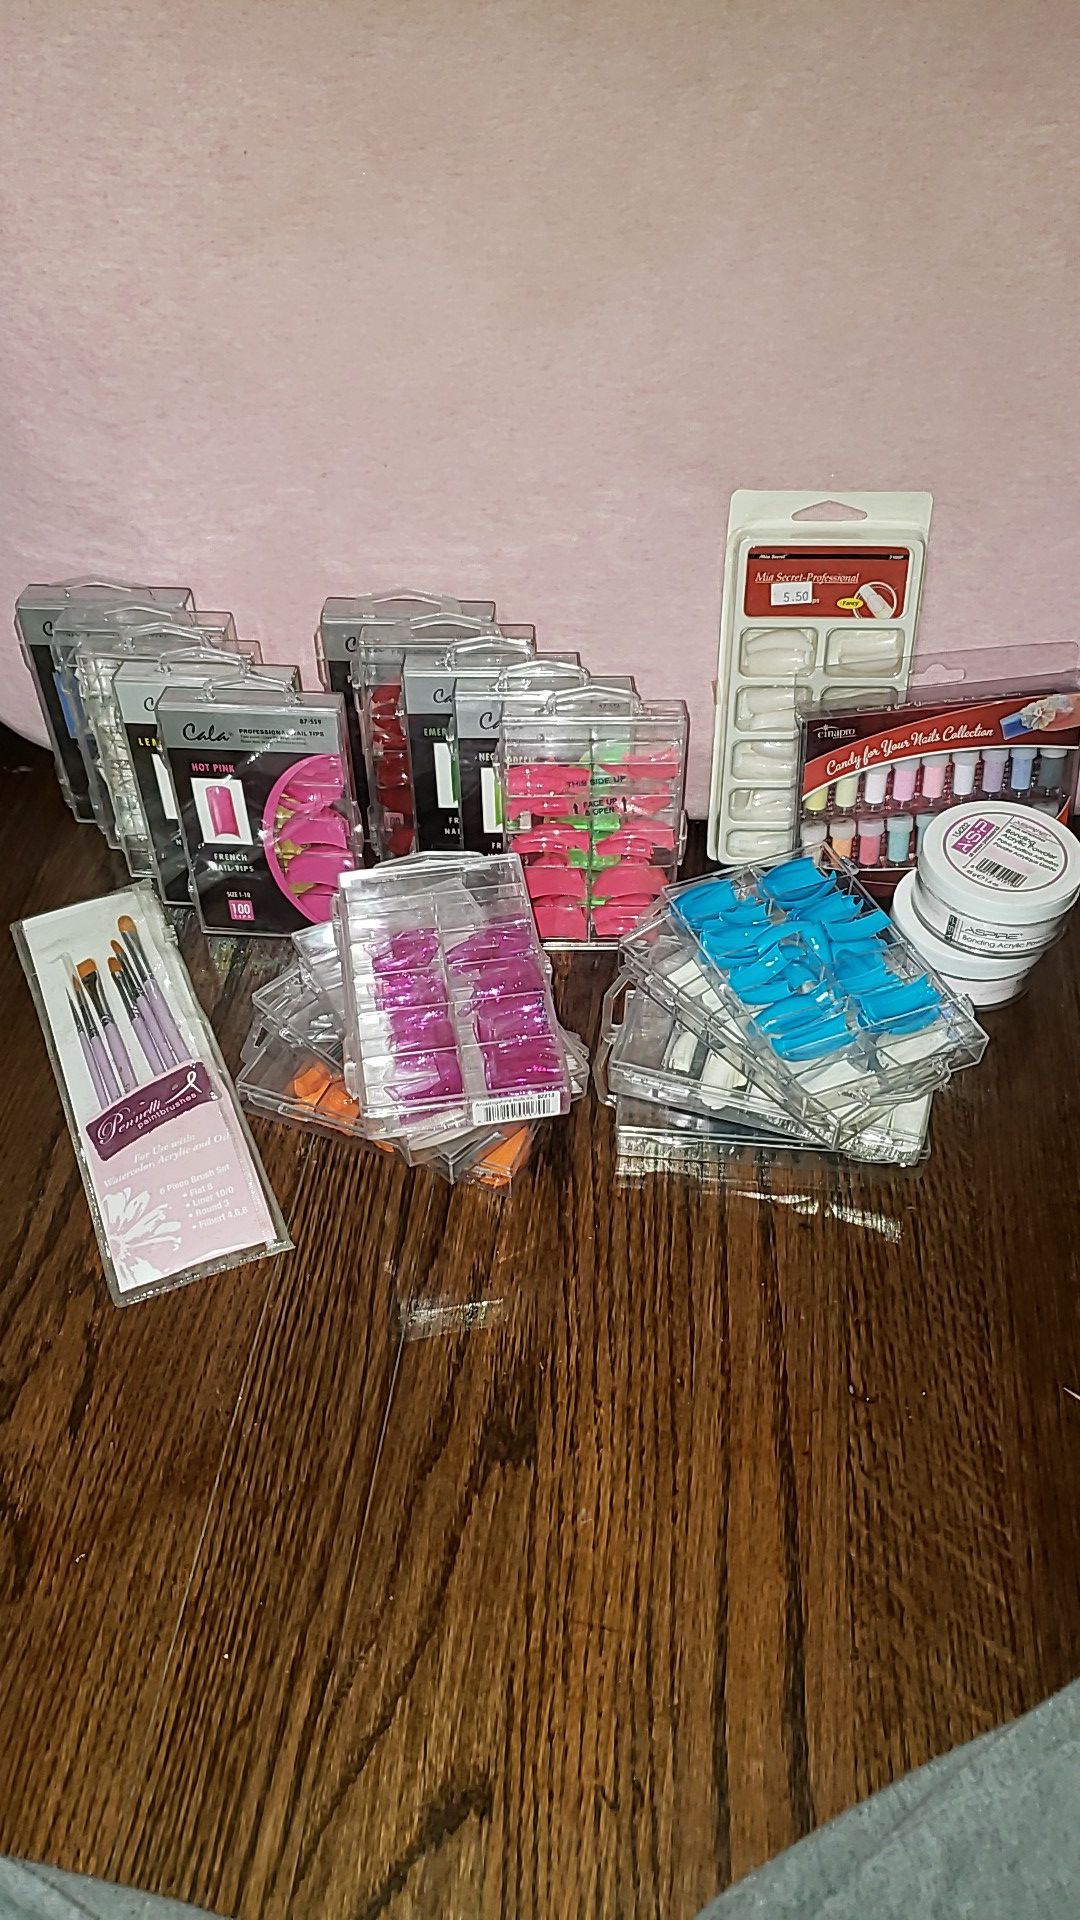 1000+ Colored nail tips, acrylic powder, new brushes, more...